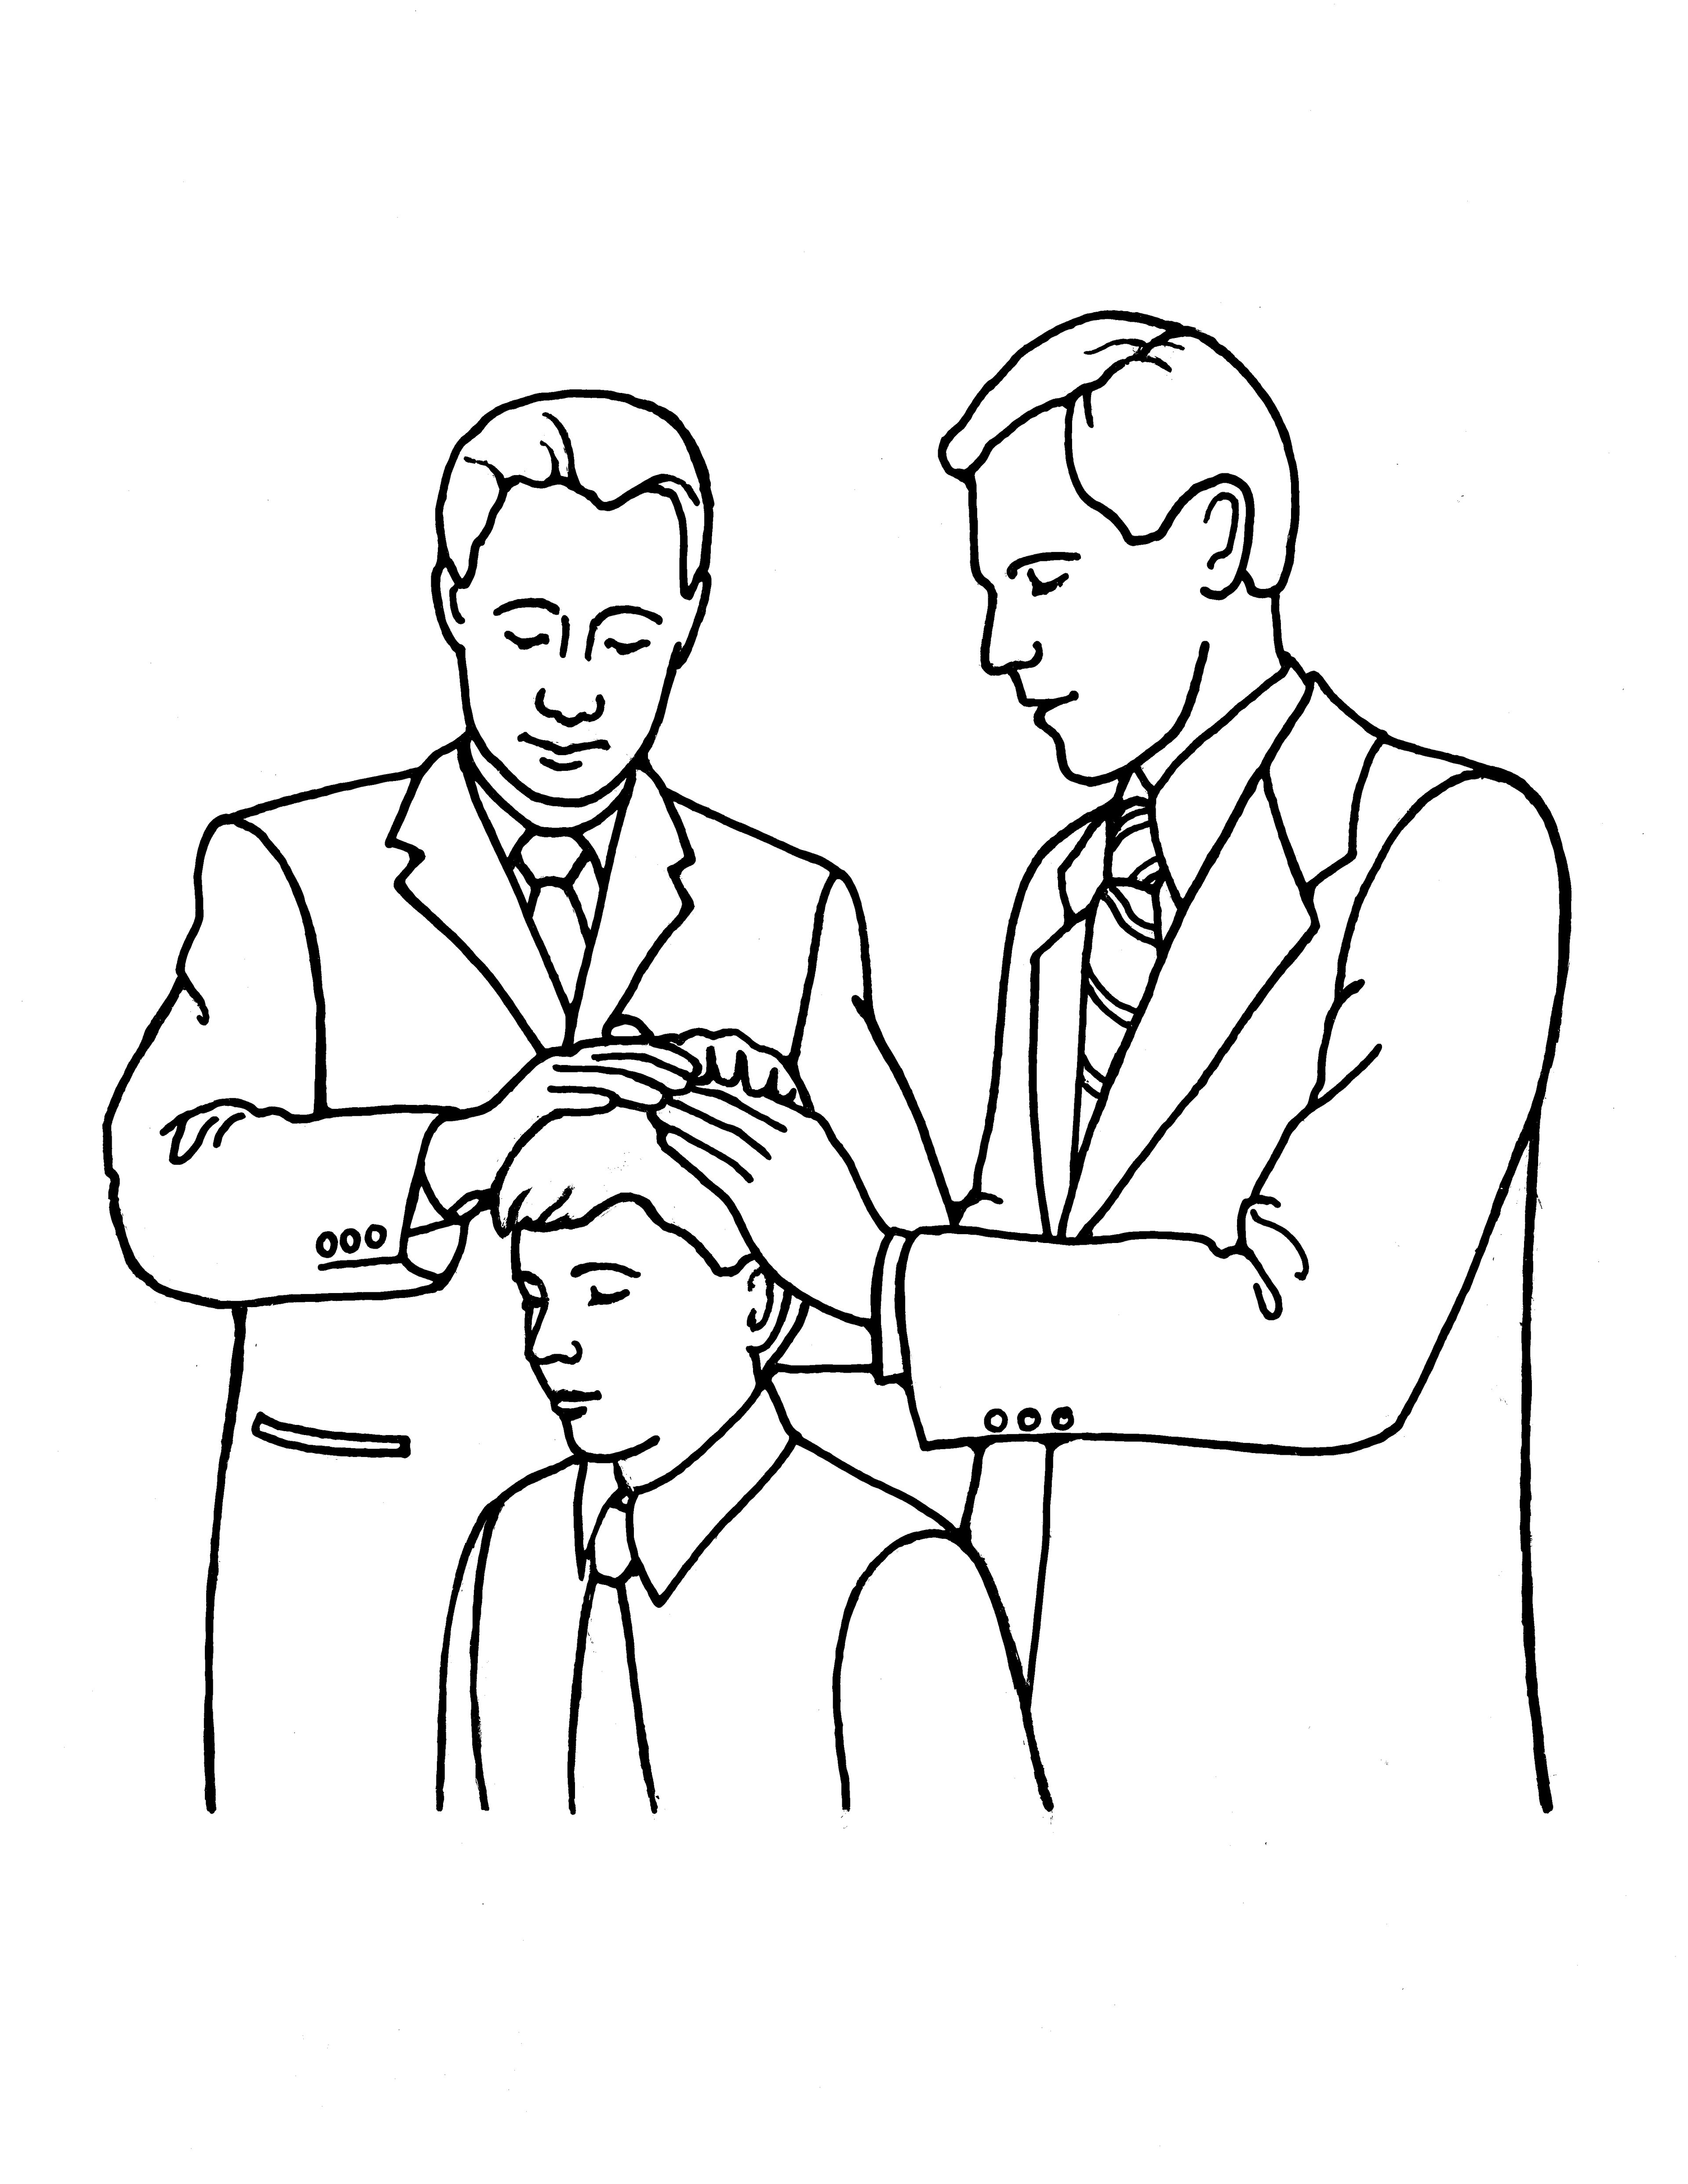 An illustration of a young man receiving the Melchizedek Priesthood.